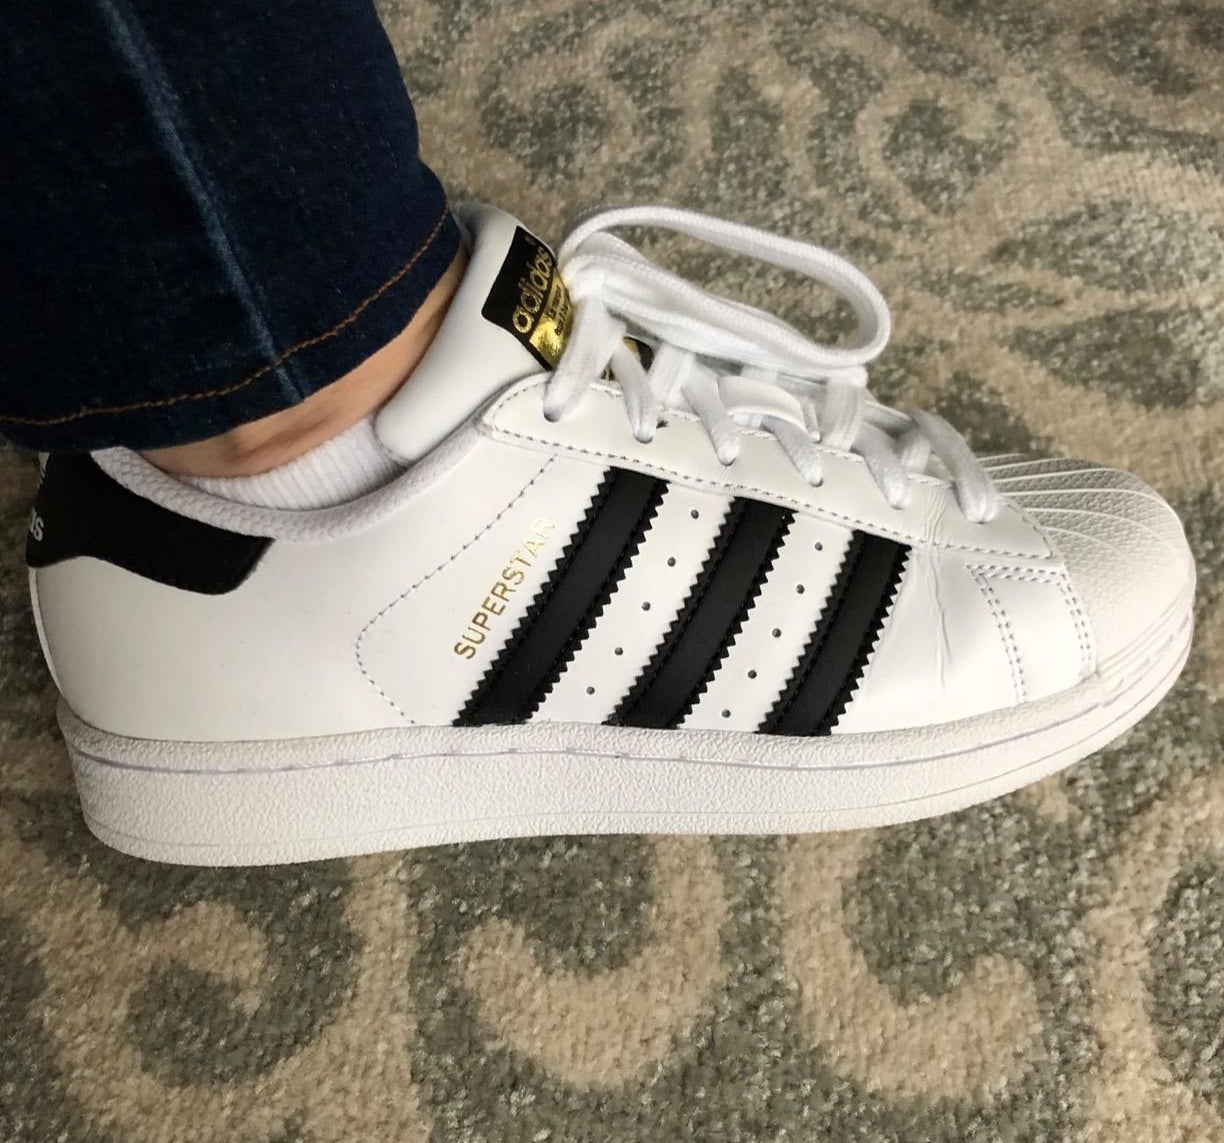 A reviewer wearing the Adidas Originals Superstar sneaker in white with black accents